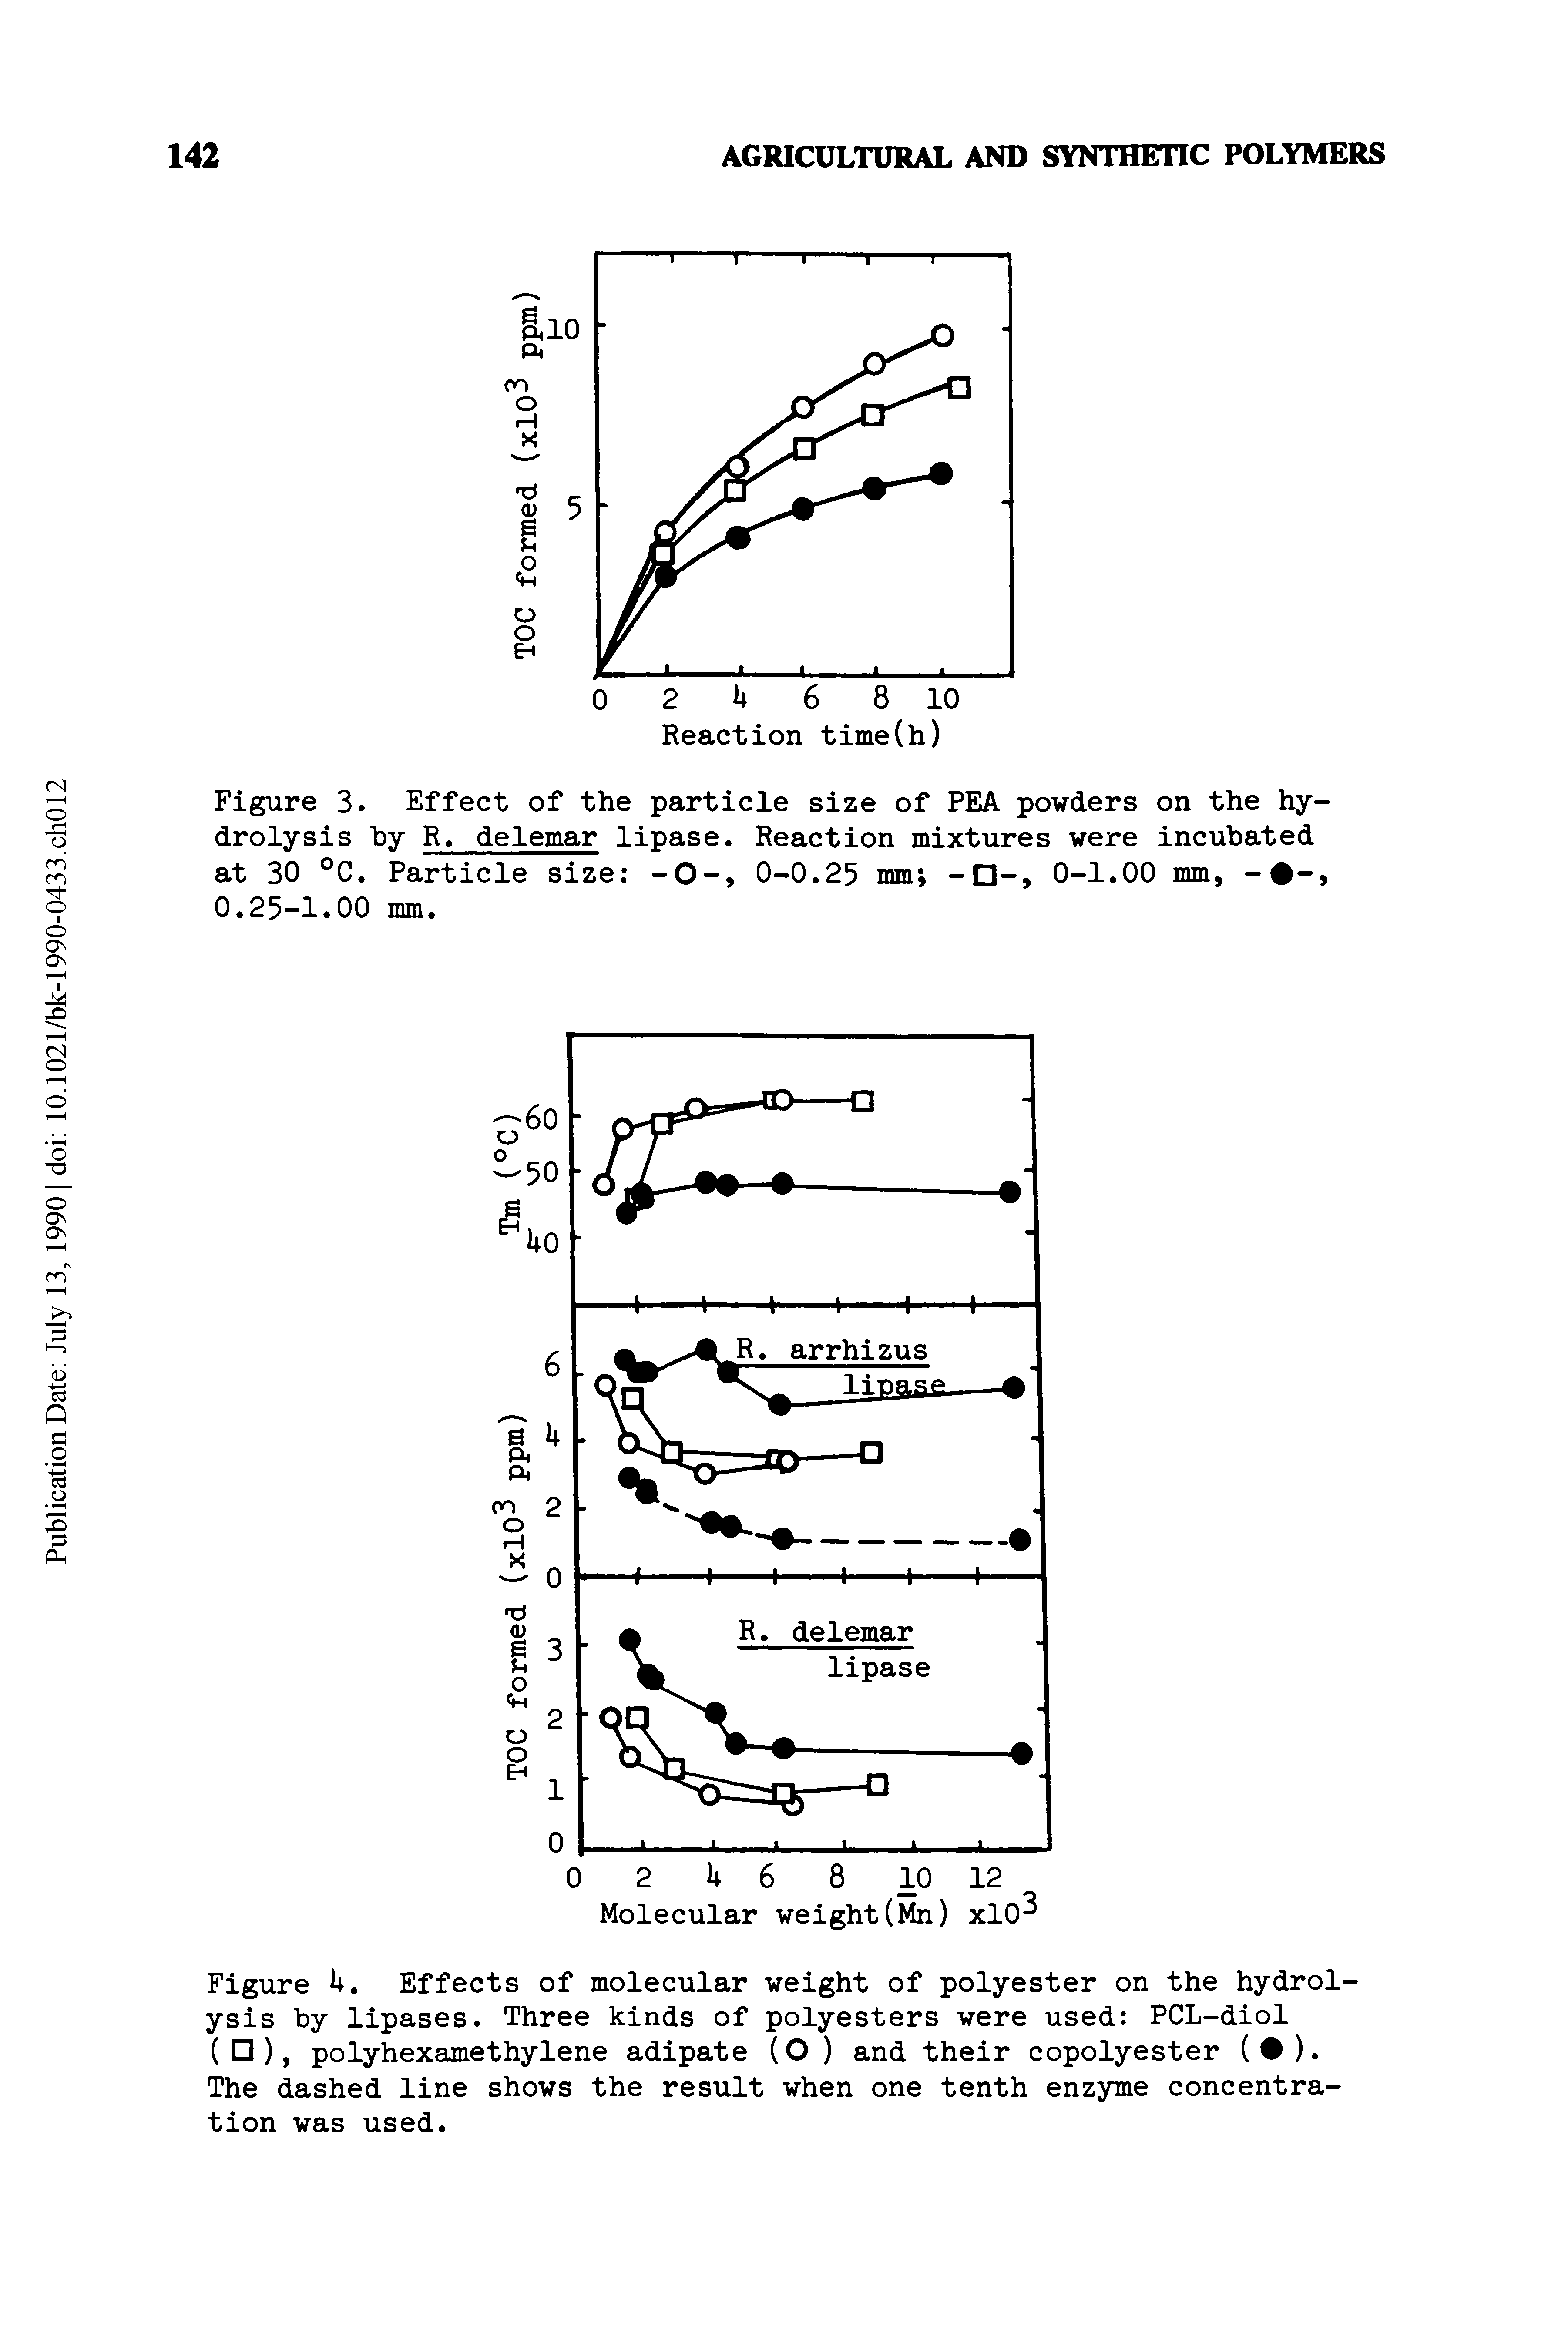 Figure 3. Effect of the particle size of PEA powders on the hydrolysis by R. delemar lipase. Reaction mixtures were incubated at 30 °C. Particle size -0-, 0-0.25 mm 0-1.00 mm,...